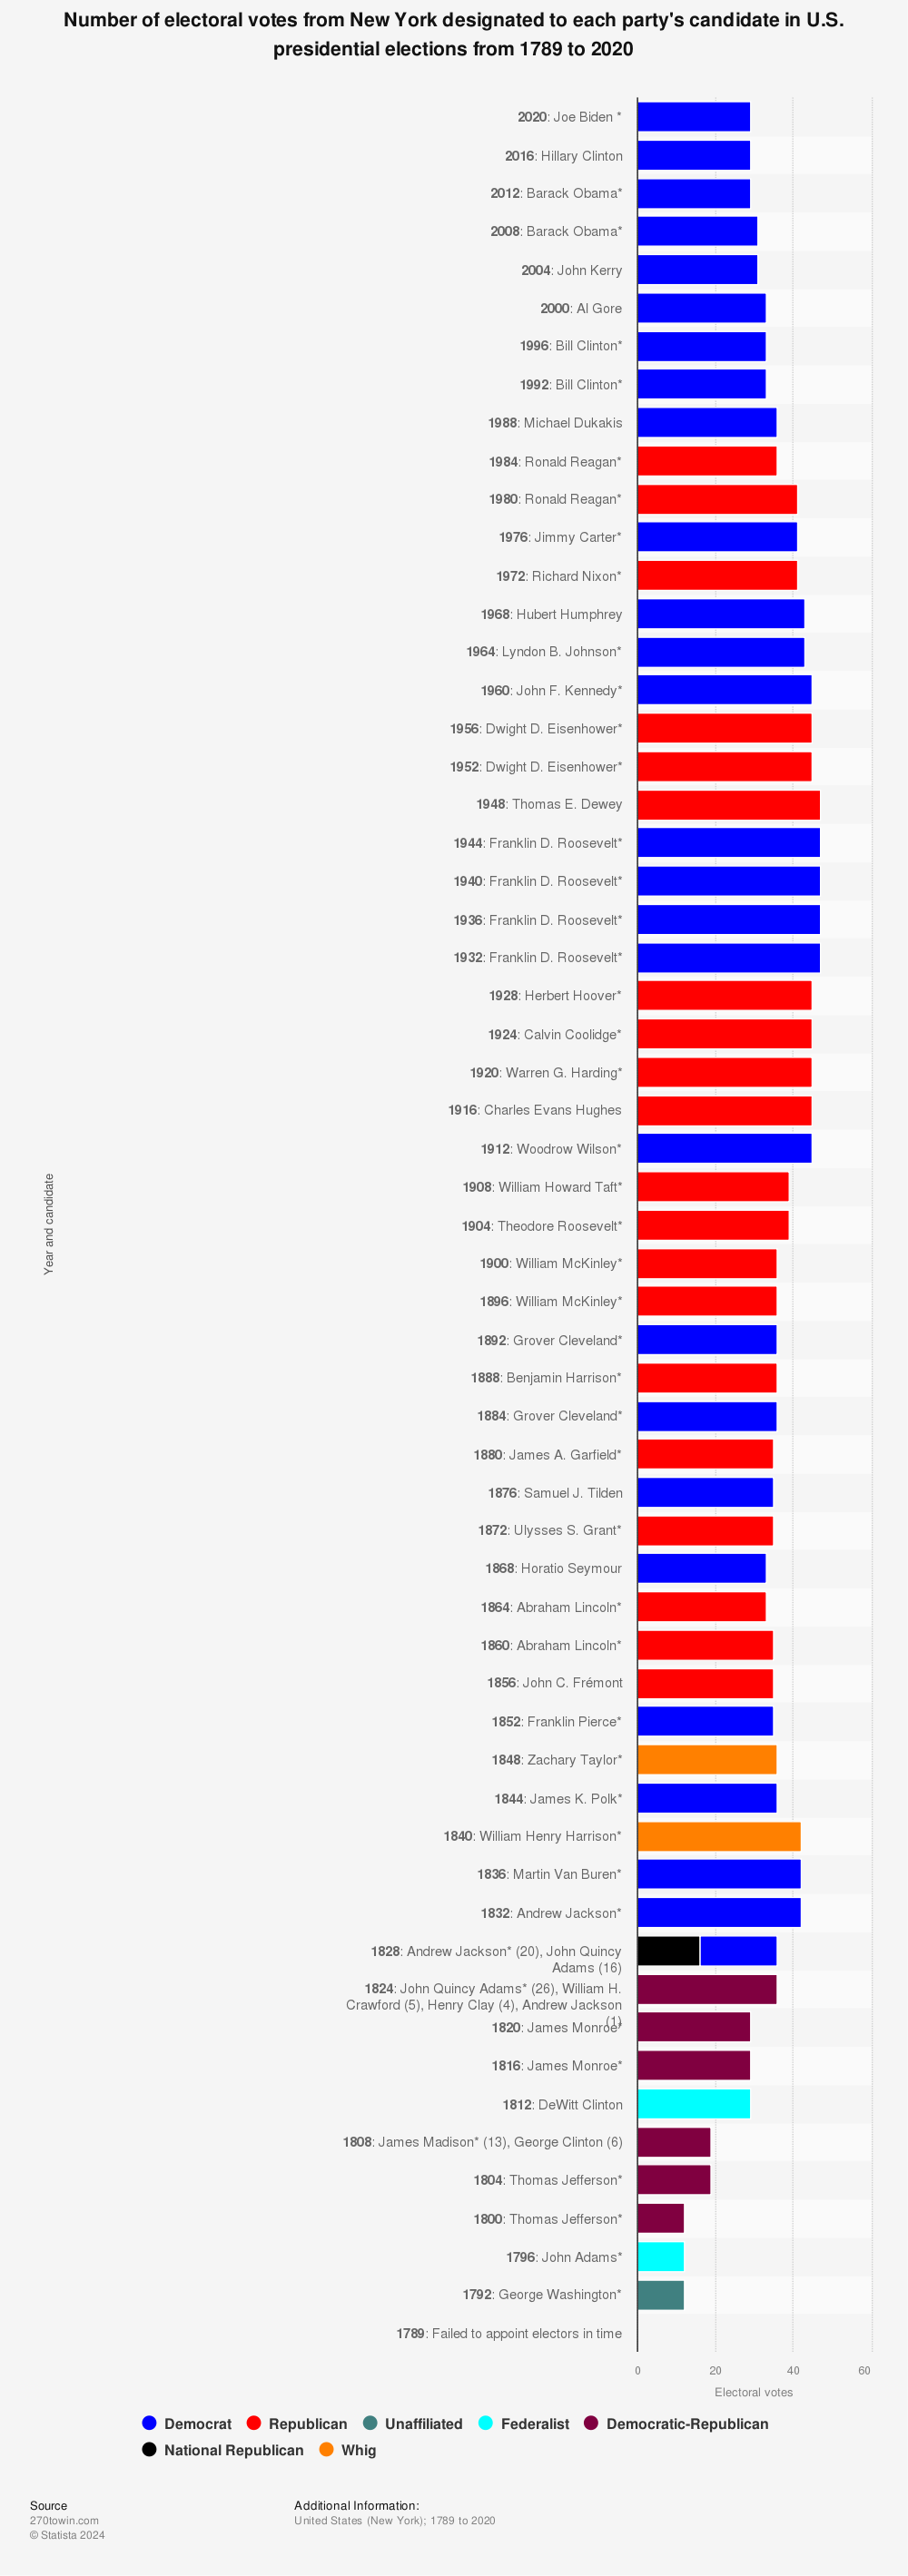 Statistic: Number of electoral votes from New York designated to each party's candidate in U.S. presidential elections from 1789 to 2020 | Statista